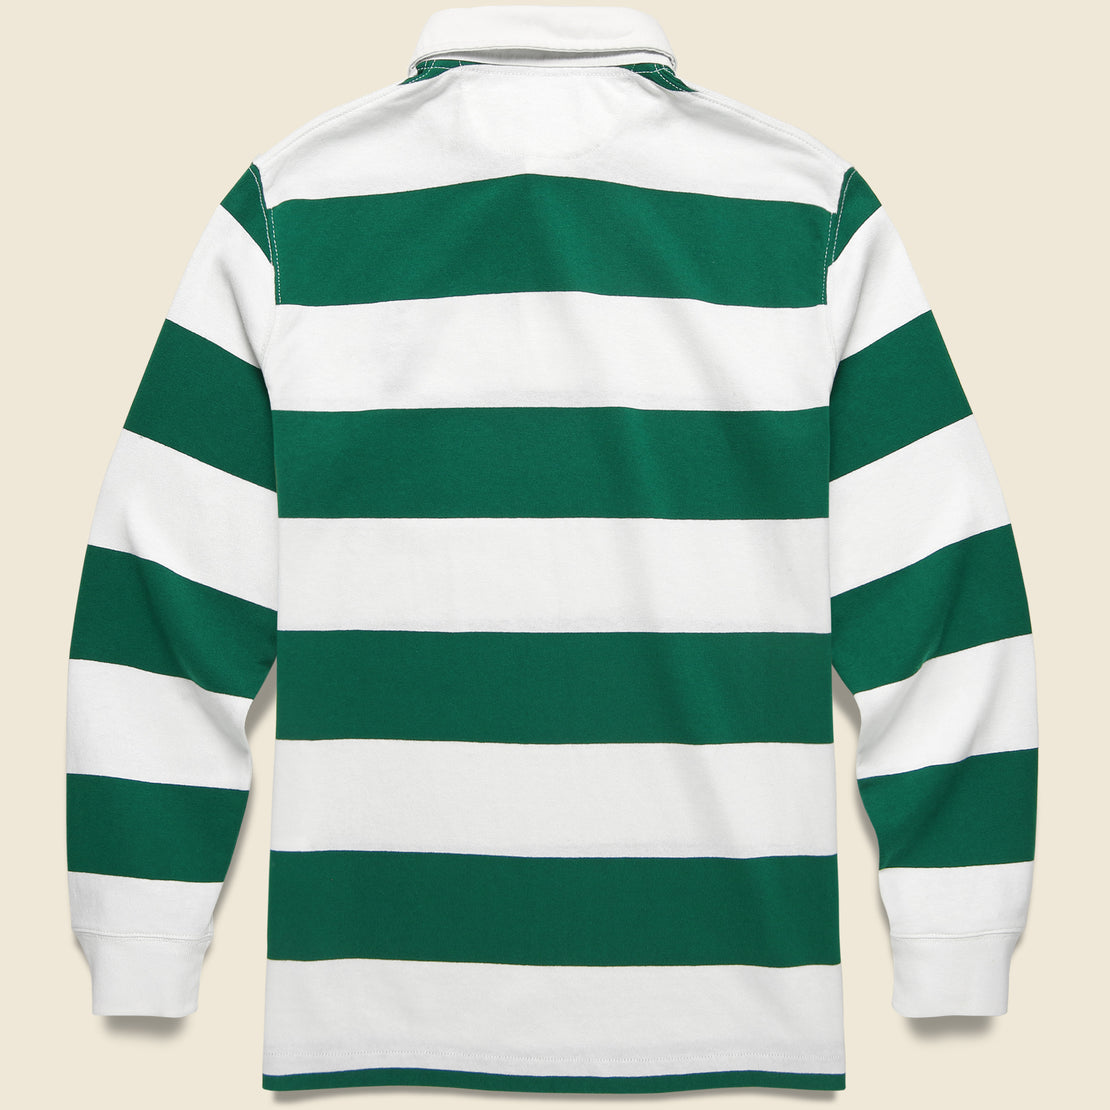 Preppy Bear Rugby Shirt - Green/White Stripe - Polo Ralph Lauren - STAG Provisions - Tops - L/S Knit